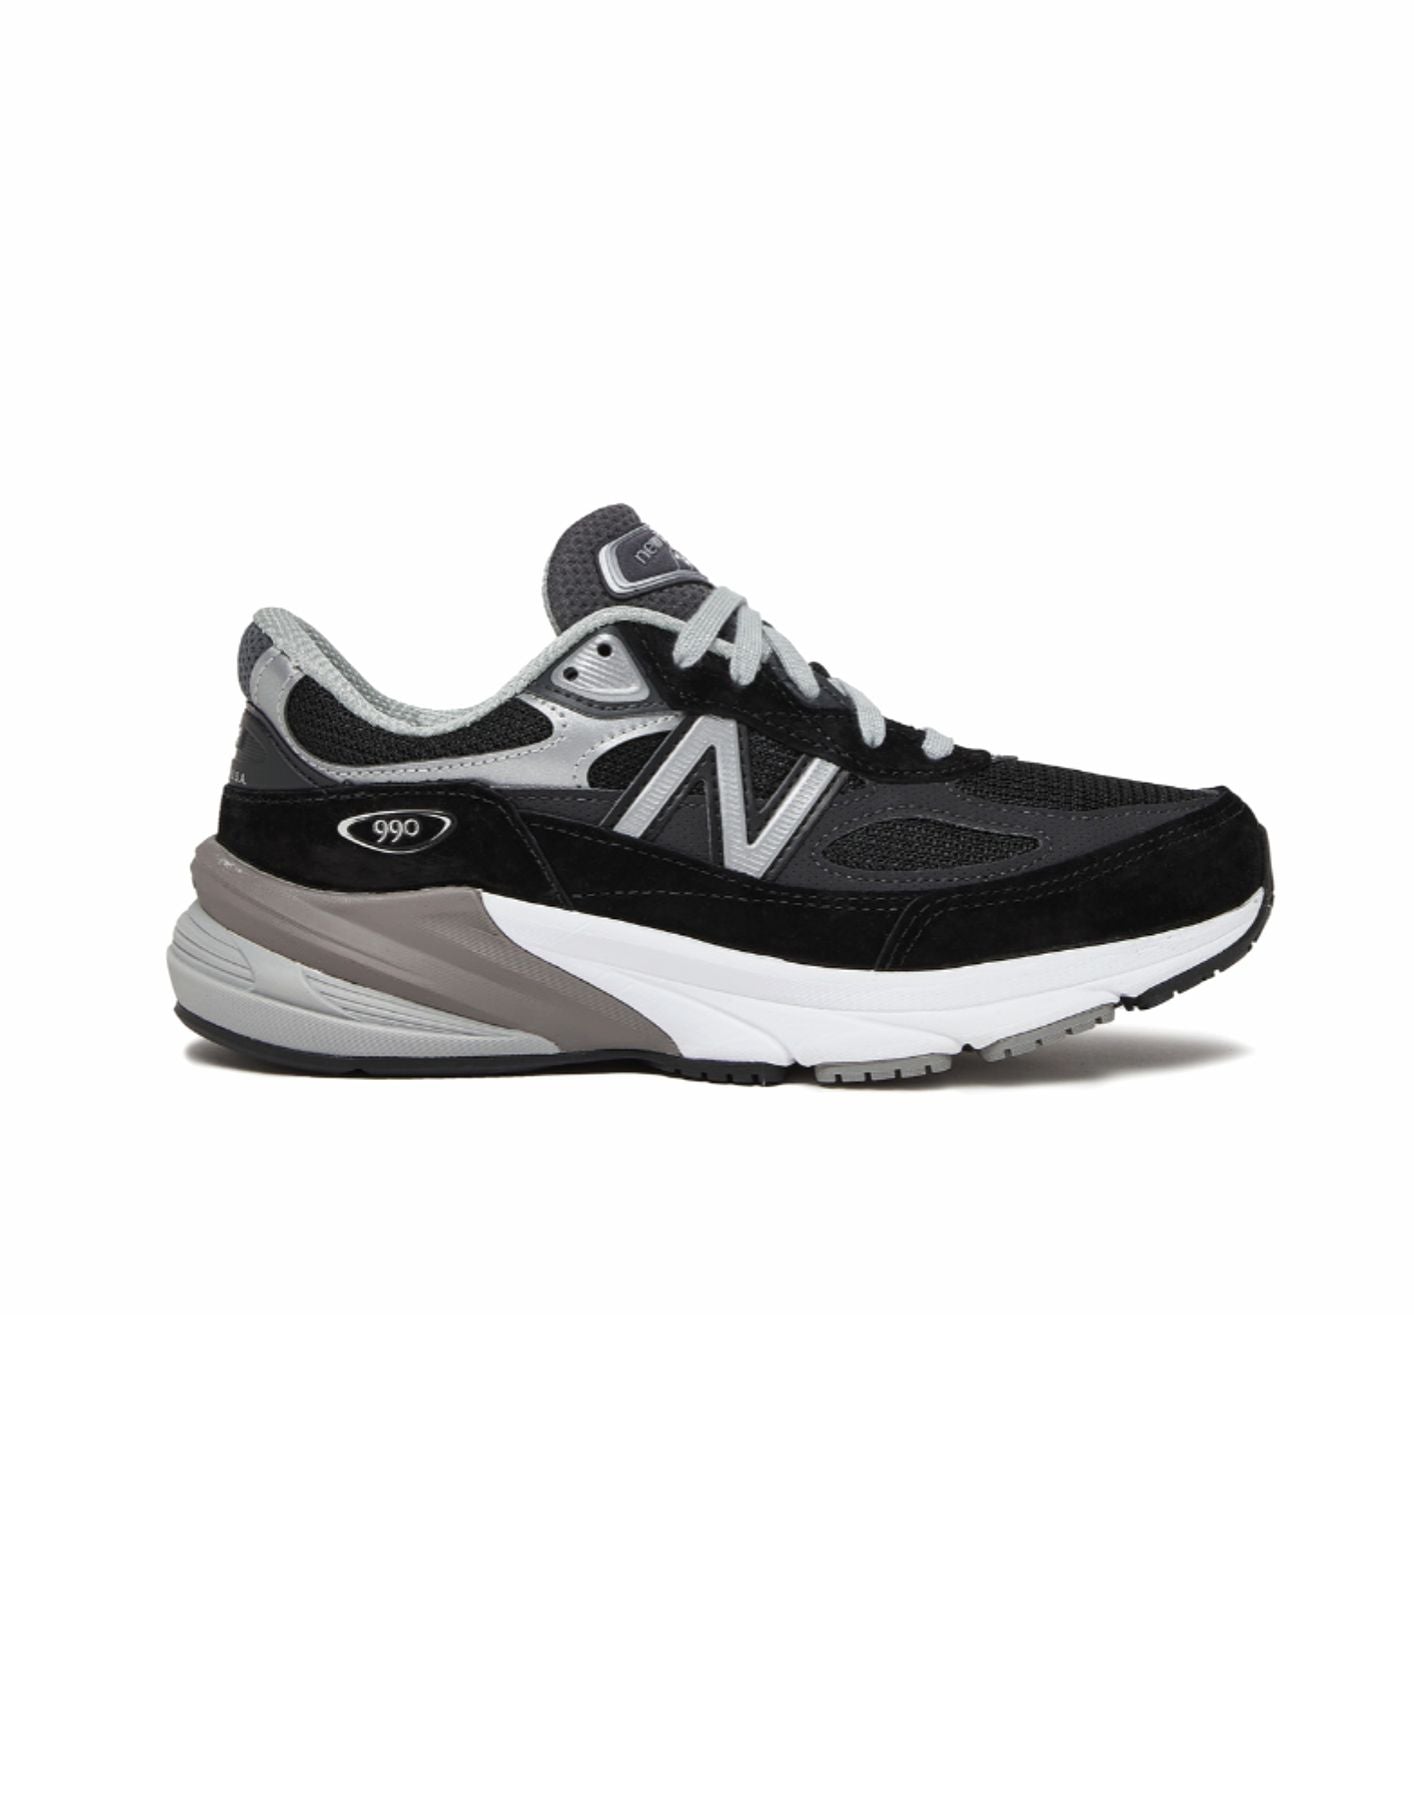 Shoes for man M990BK6 NEW BALANCE